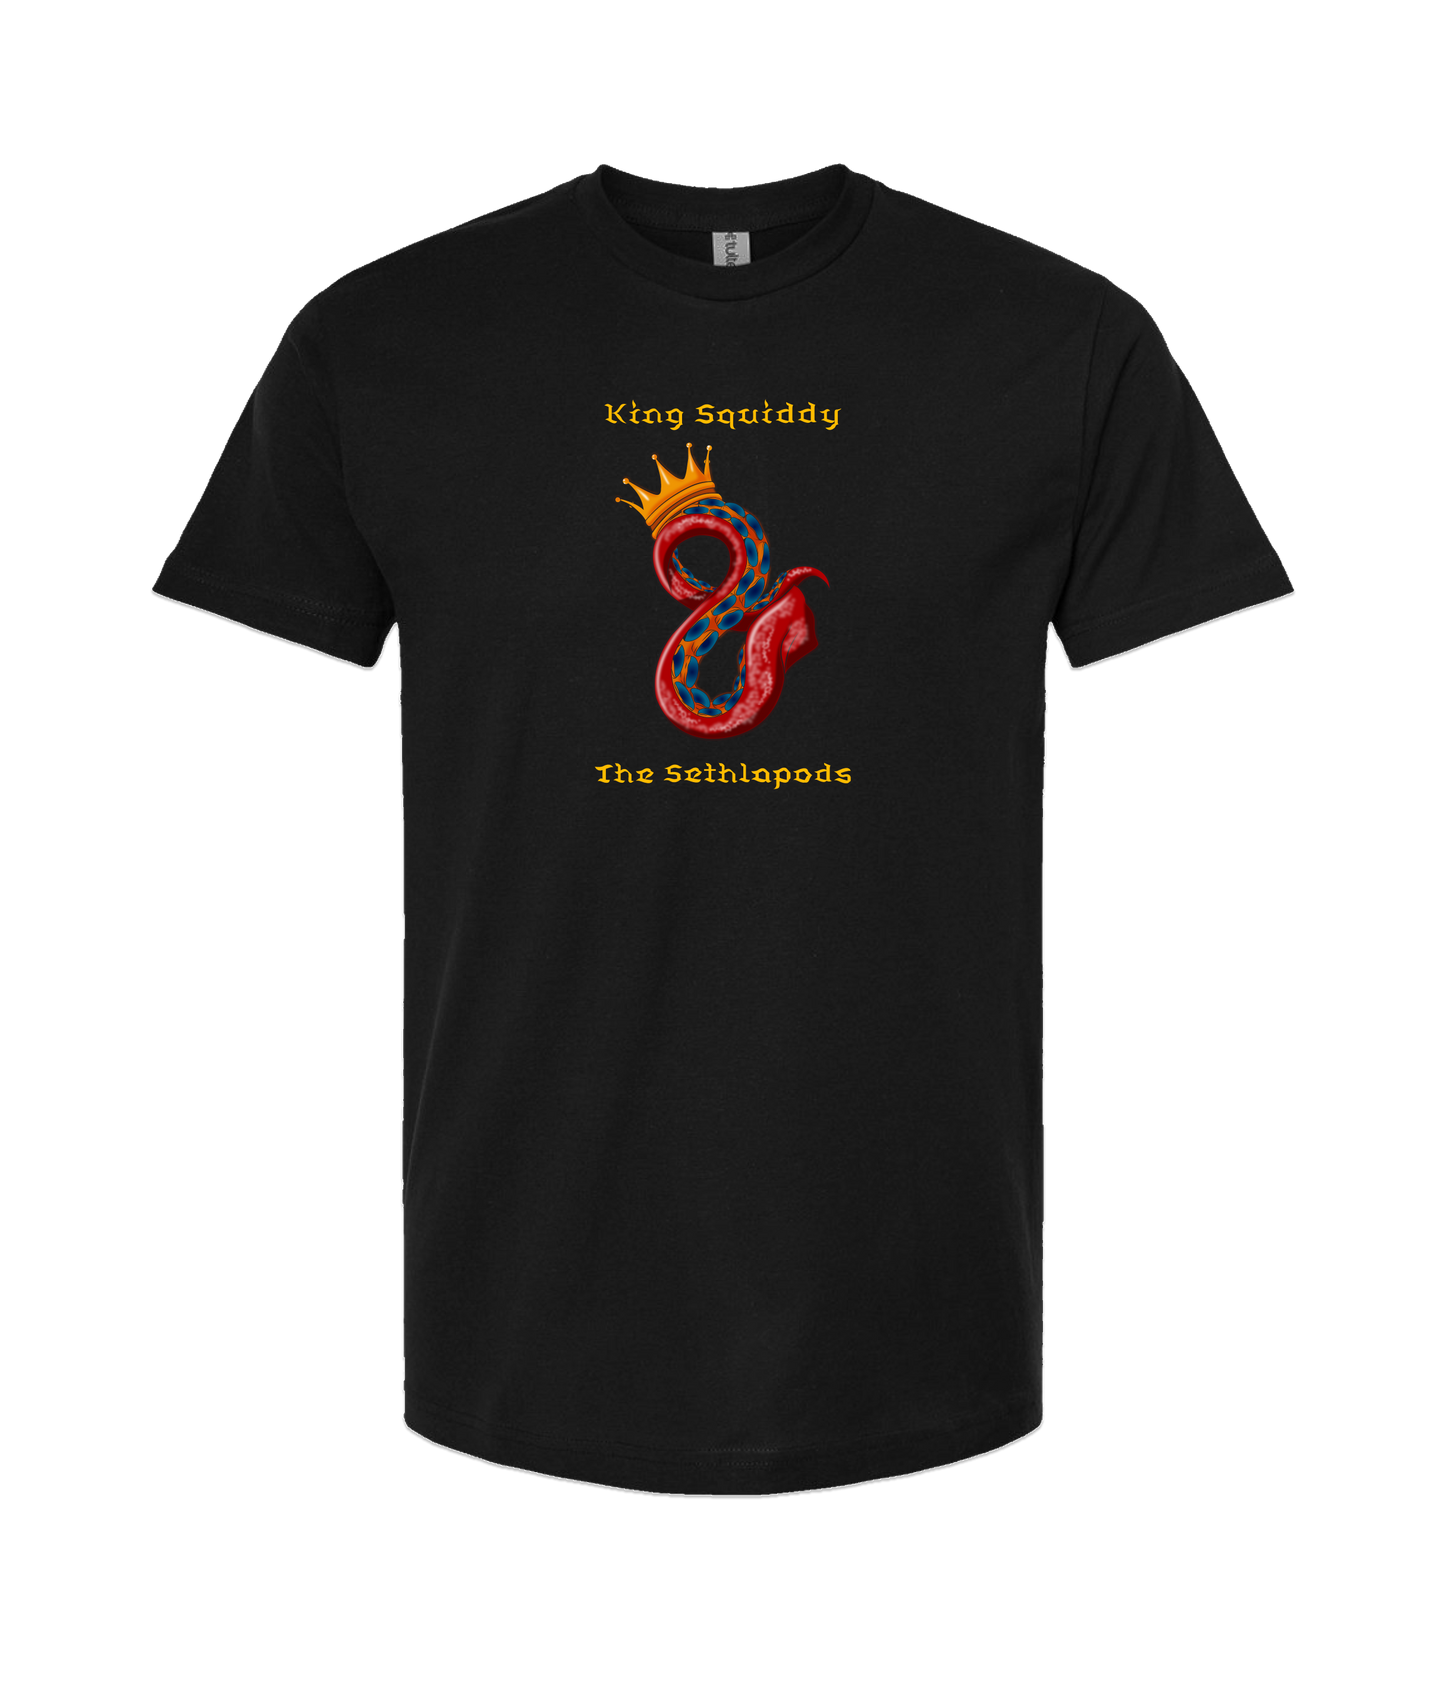 King Squiddy and the Sethlapods - Tentacle Crown - Black T Shirt